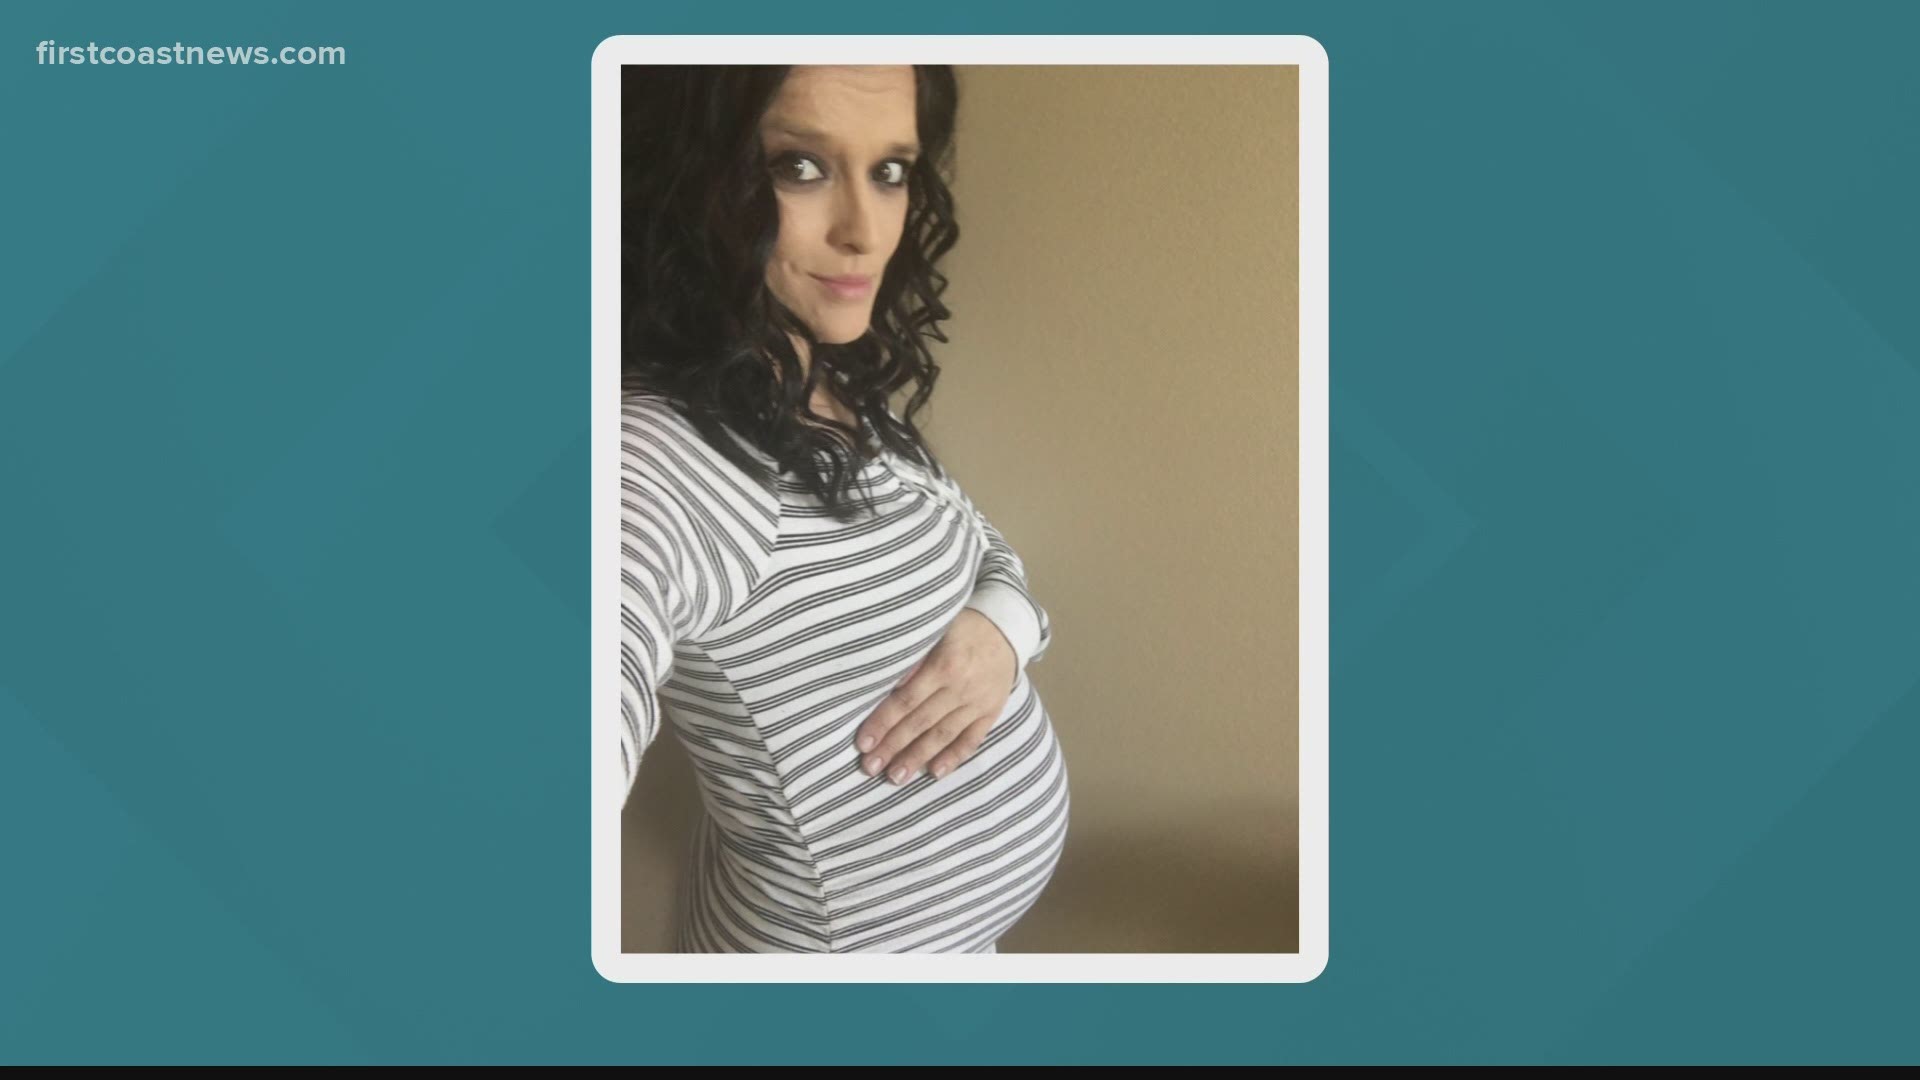 A doctor answers questions about staying safe amid the COVID-19 pandemic while pregnant.